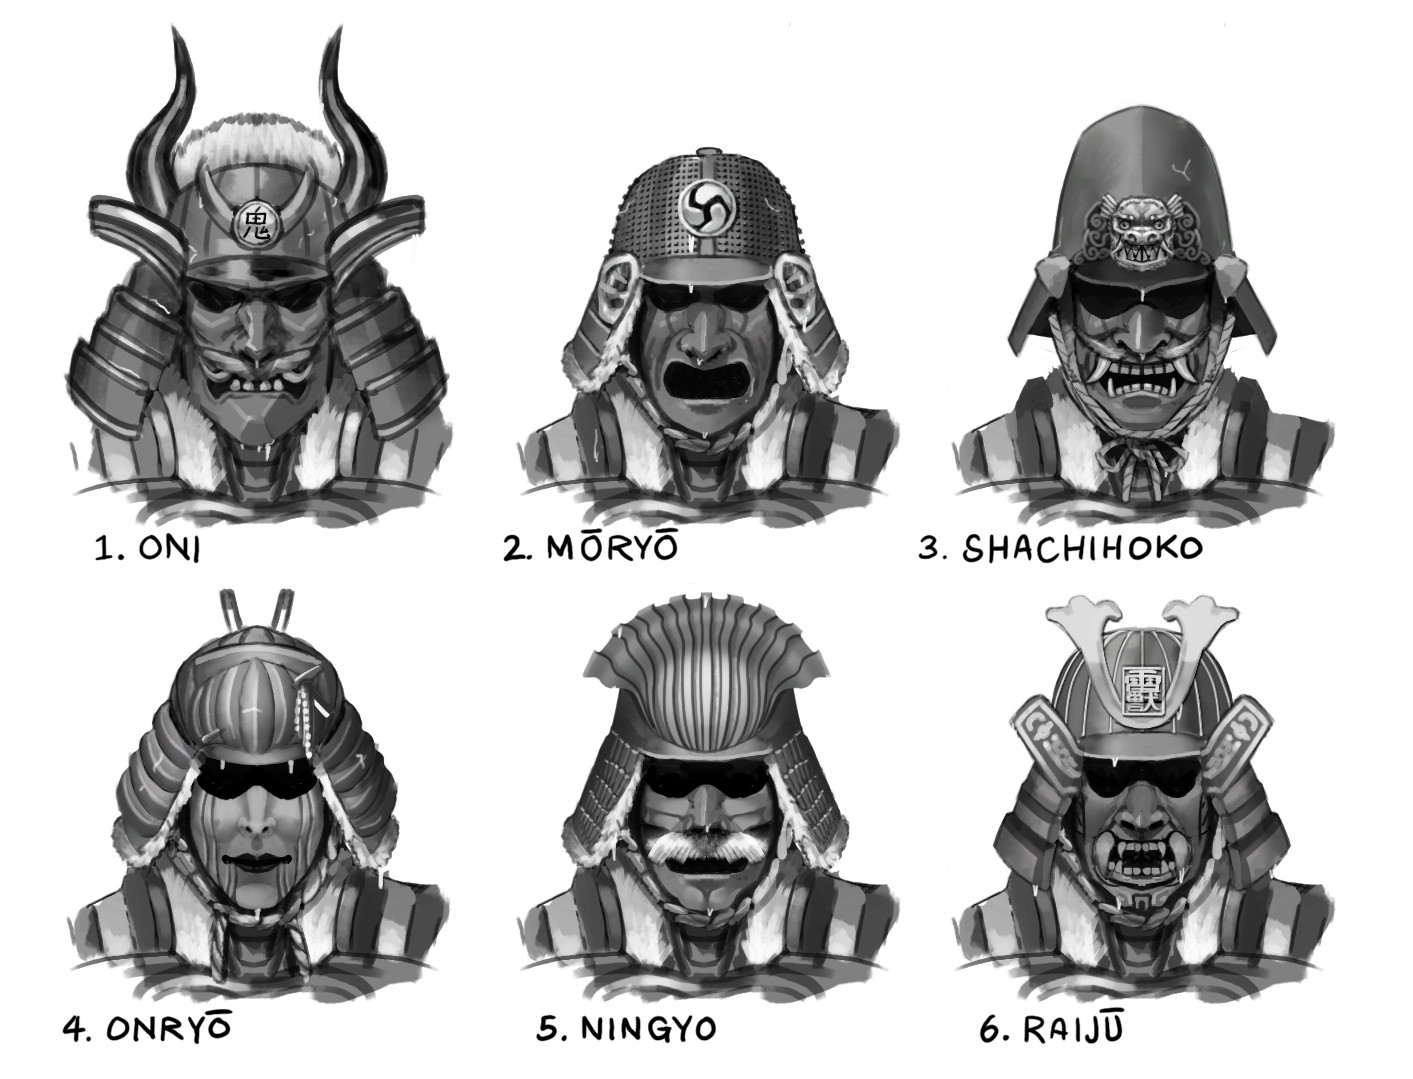 A couple of early iterations of the helmet. I knew I wanted heavily Yokai (Japanese mythological beasts) influenced helmets and in the end I went for the Shachihoko. The final design is a bit sharper with two large fin-shaped bows added to the forehead.